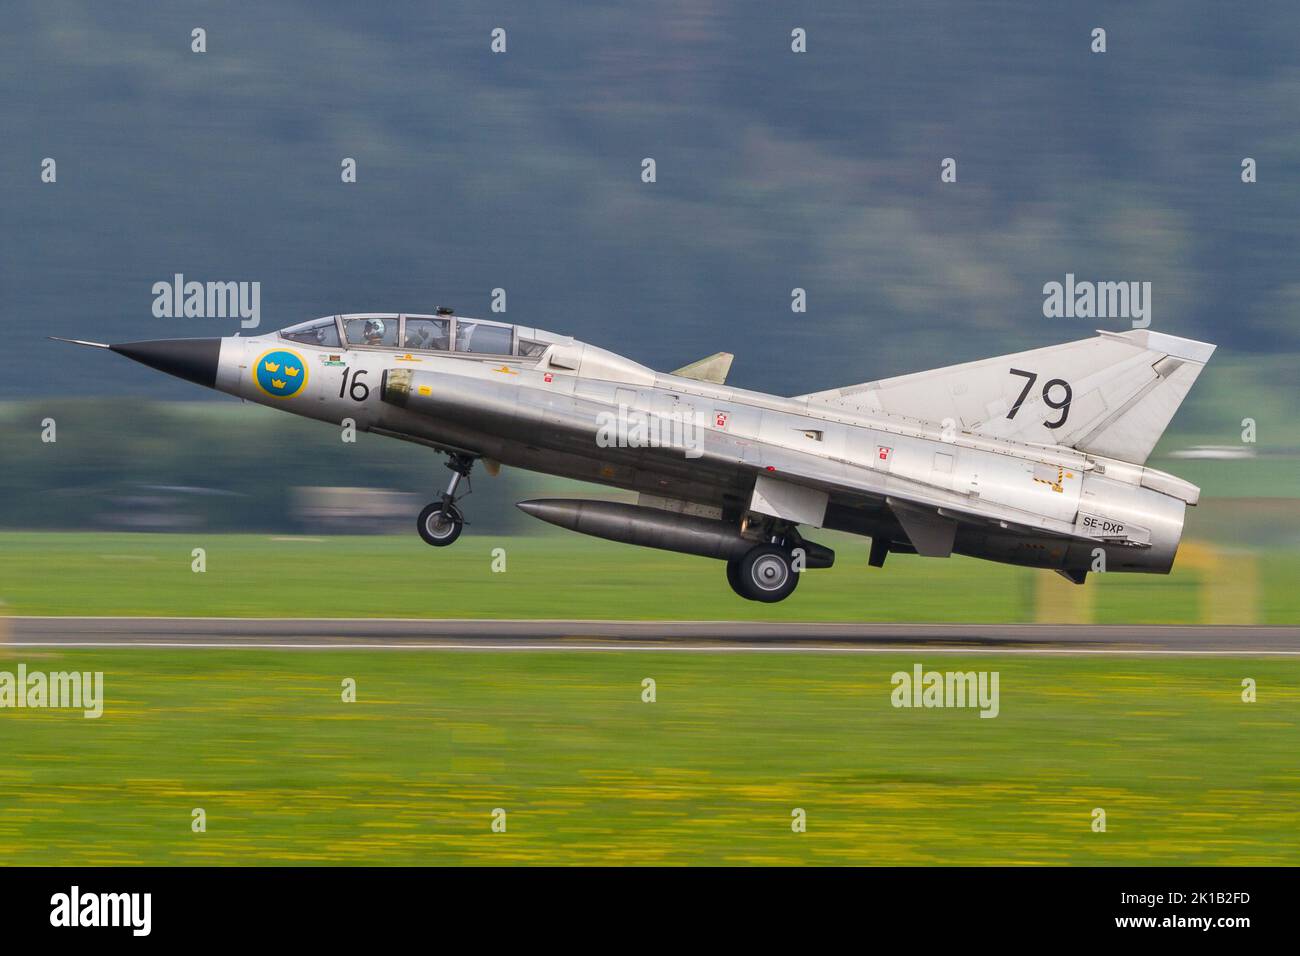 A Saab Draken military jet of the Swedish Air Force landing in Zeltweg, Austria to attend the Airpower airshow Stock Photo